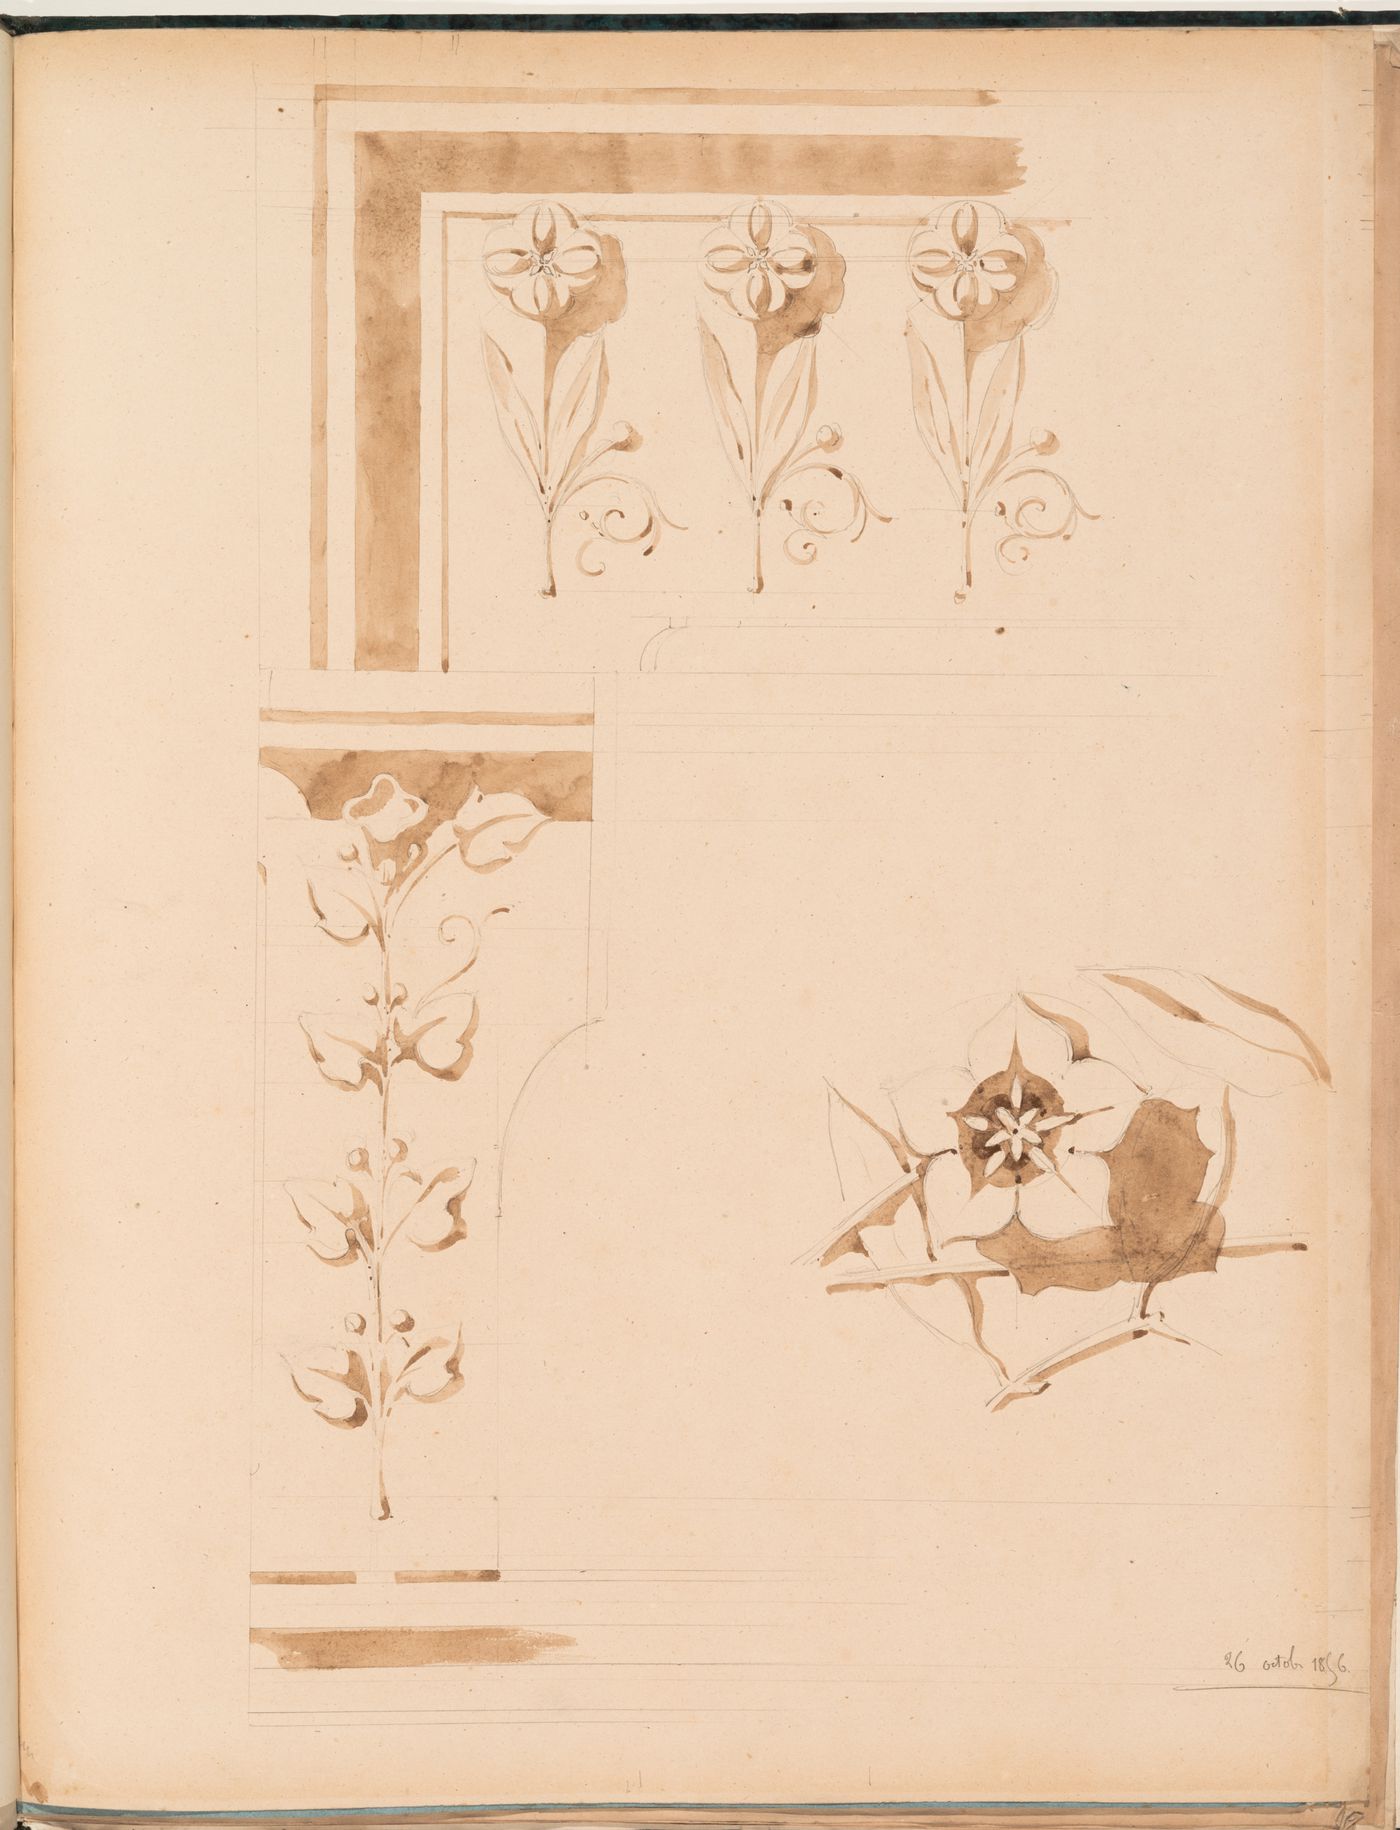 Details of floral ornament, possibly from soffits